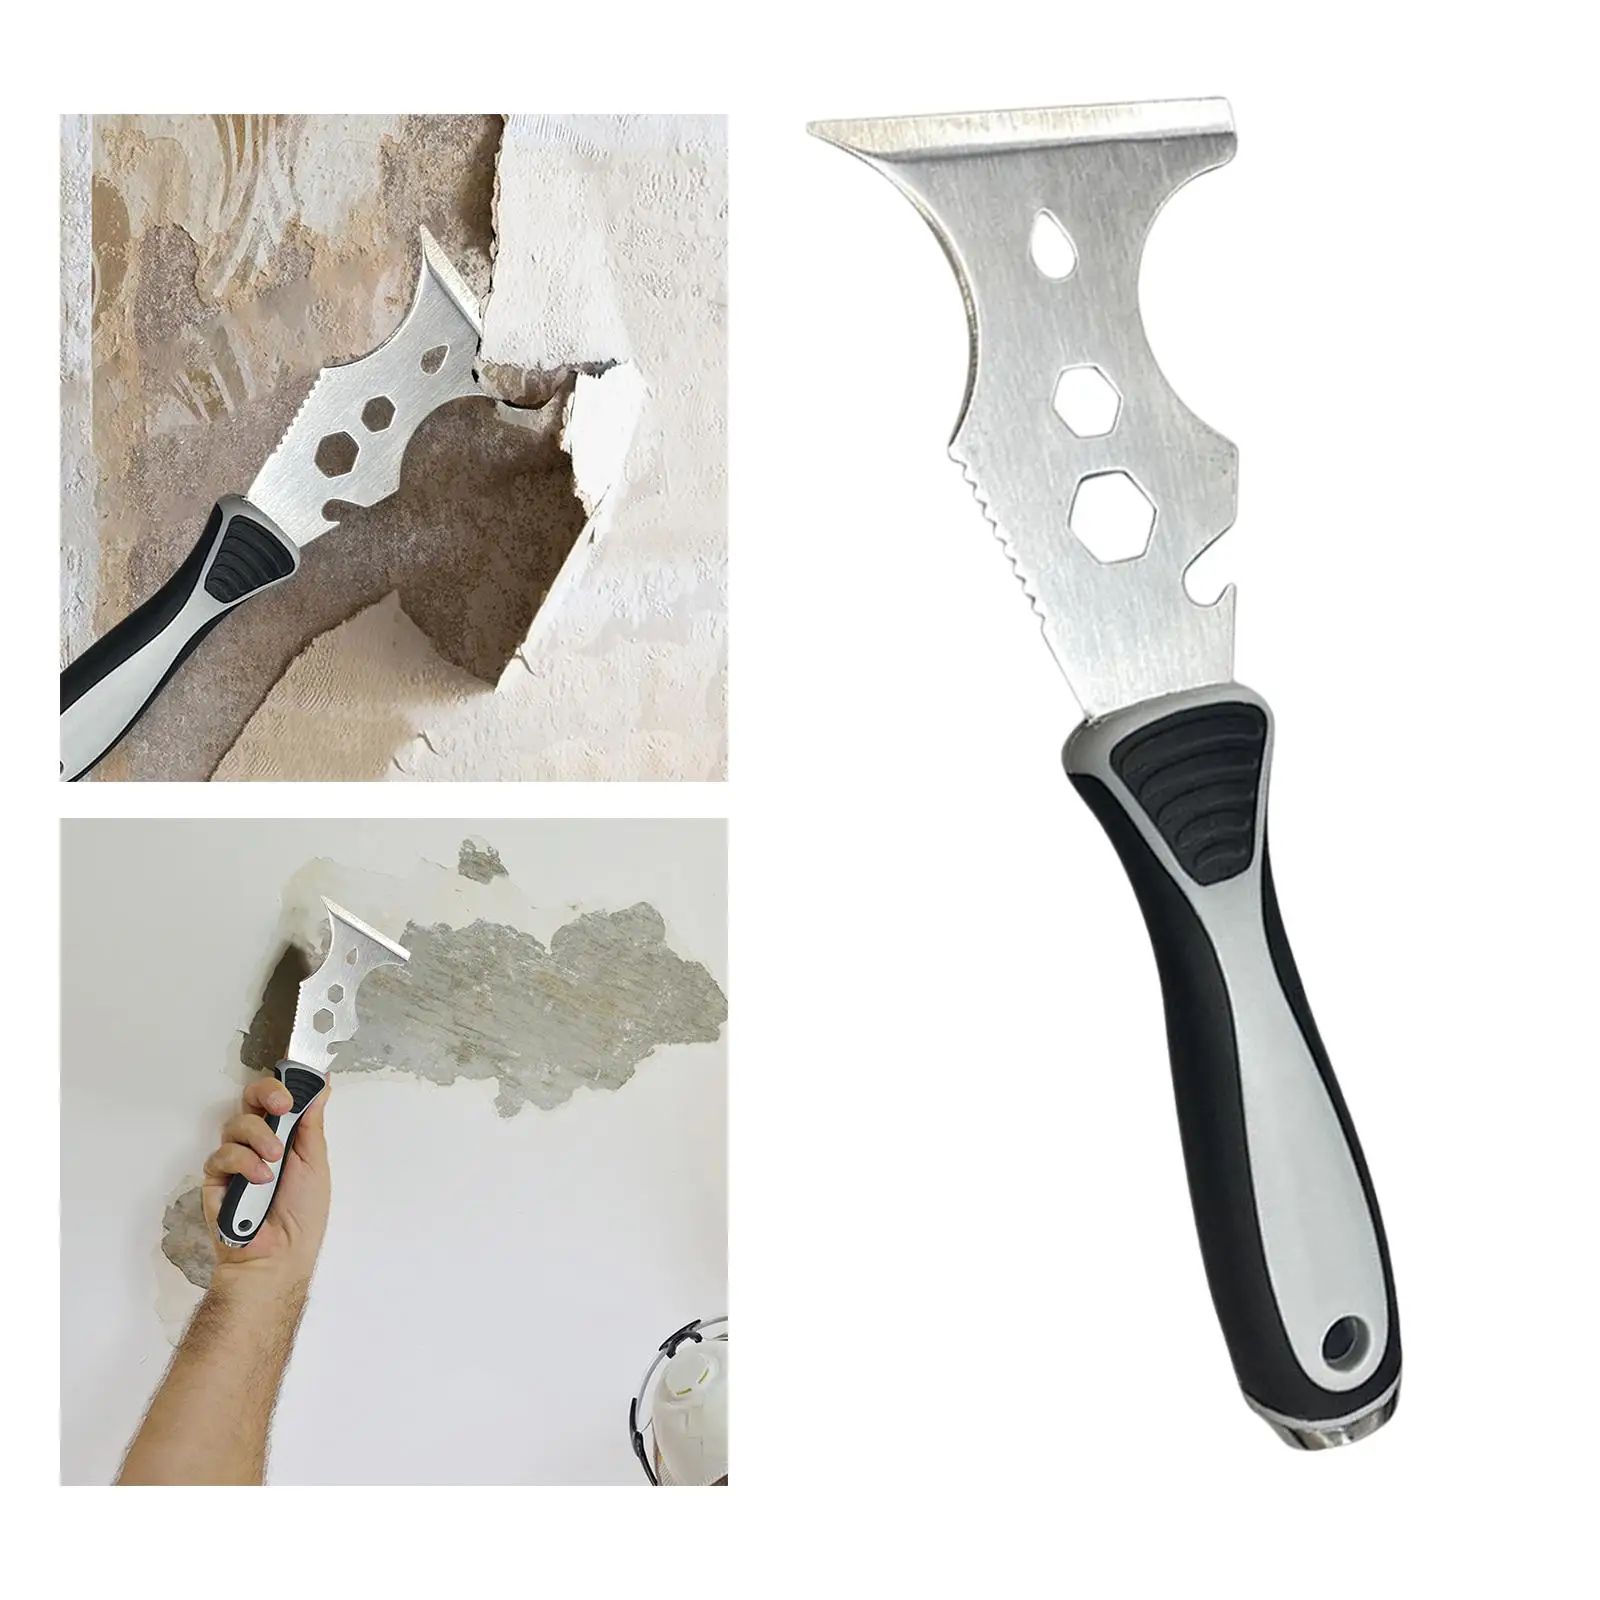 Stainless Steel Paint Scraper Removal Tool Paint Remover Professional Multi Use Putty Knife daily cleaning Repair